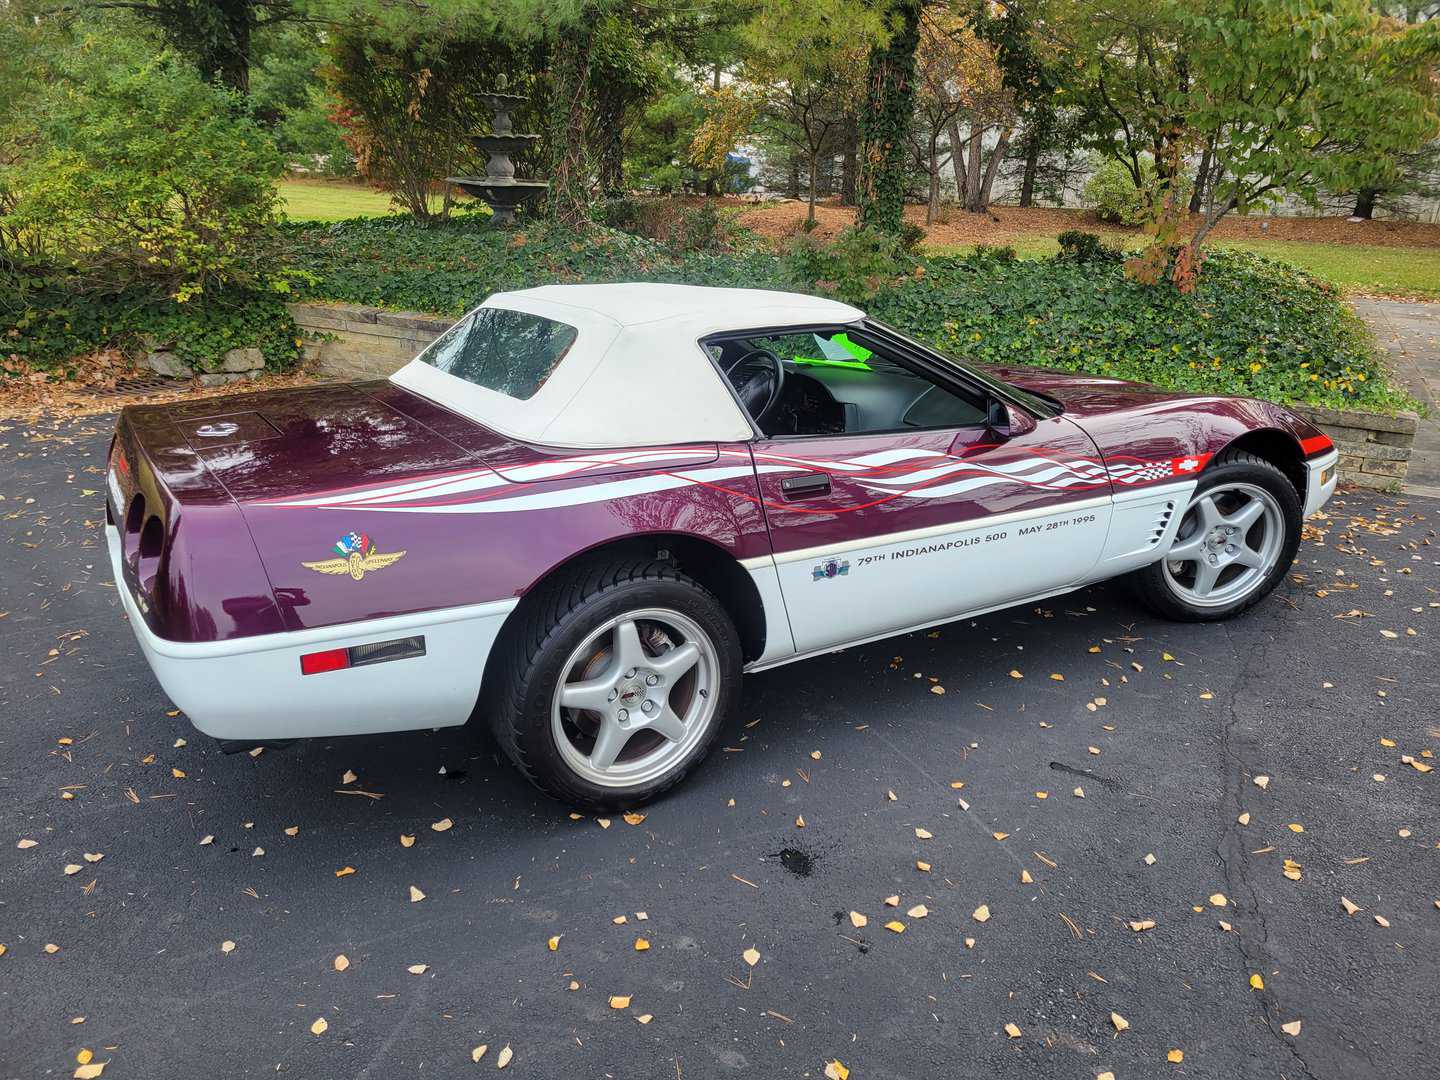 A purple and white 1995 Corvette Pace Car parked in a parking lot.